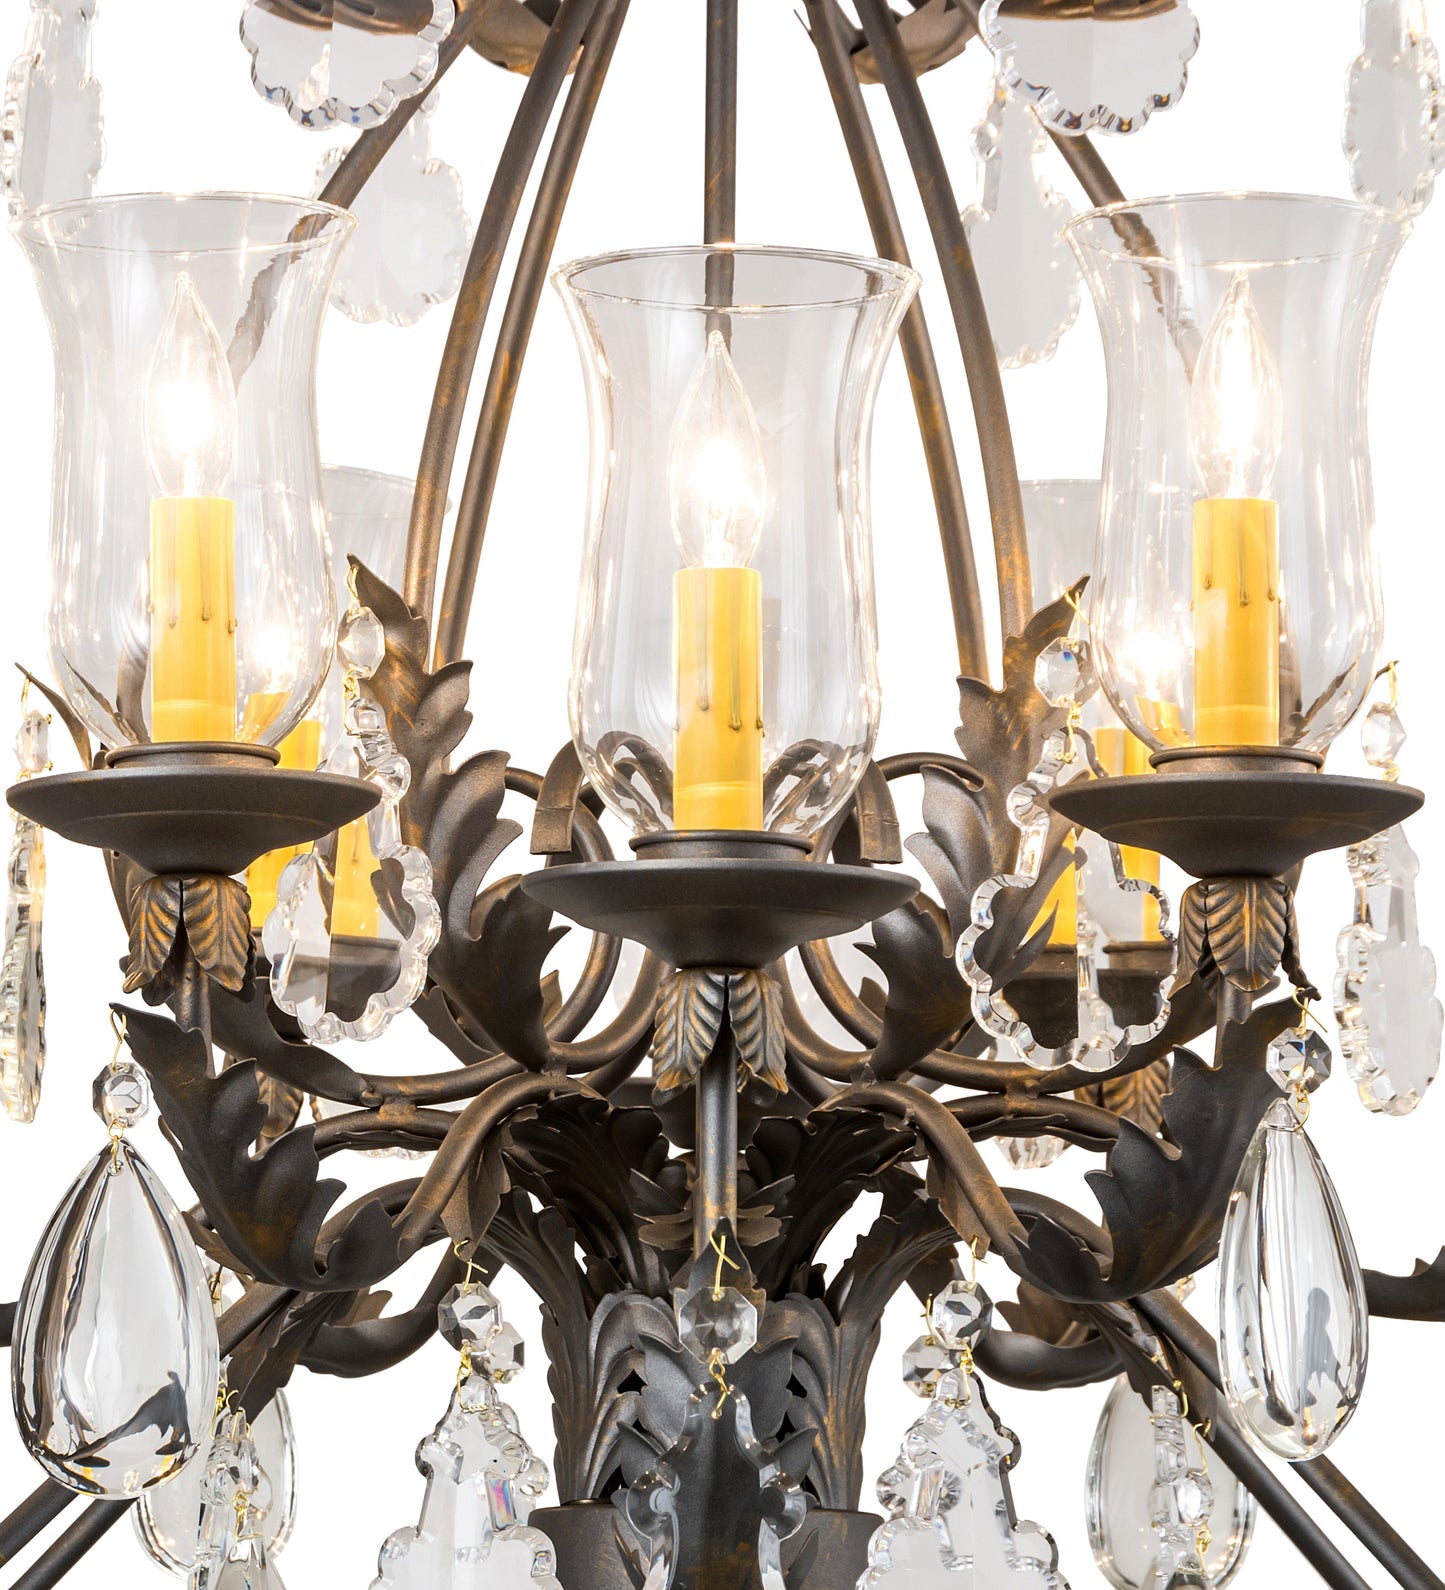 36" French Elegance 12-Light Chandelier by 2nd Ave Lighting